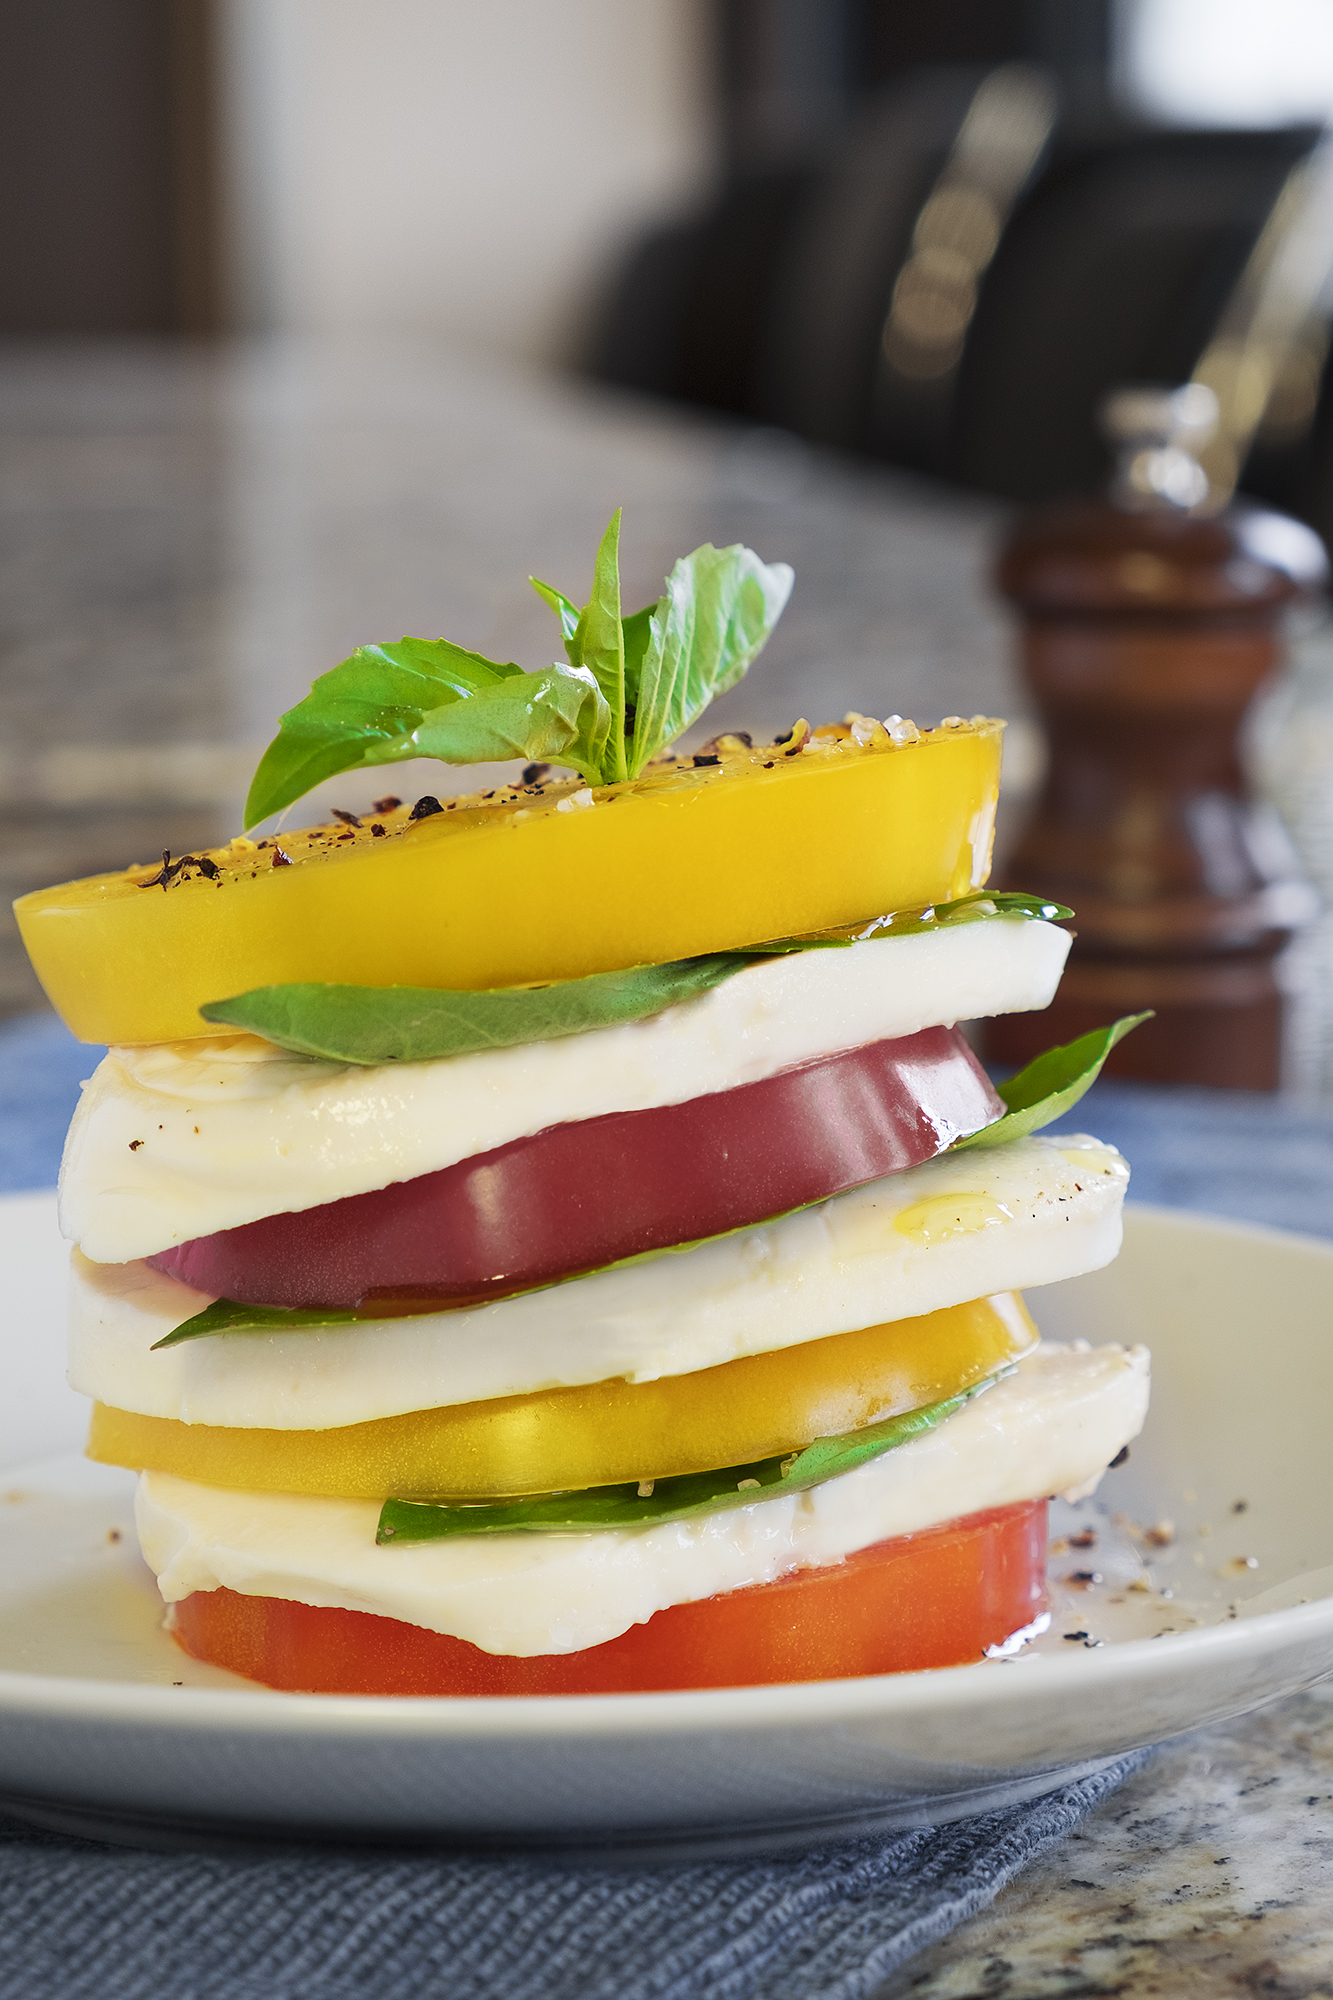 A tower of sliced heirloom tomatoes that is prepared to accomplish the tall task of satisfying your expectations.